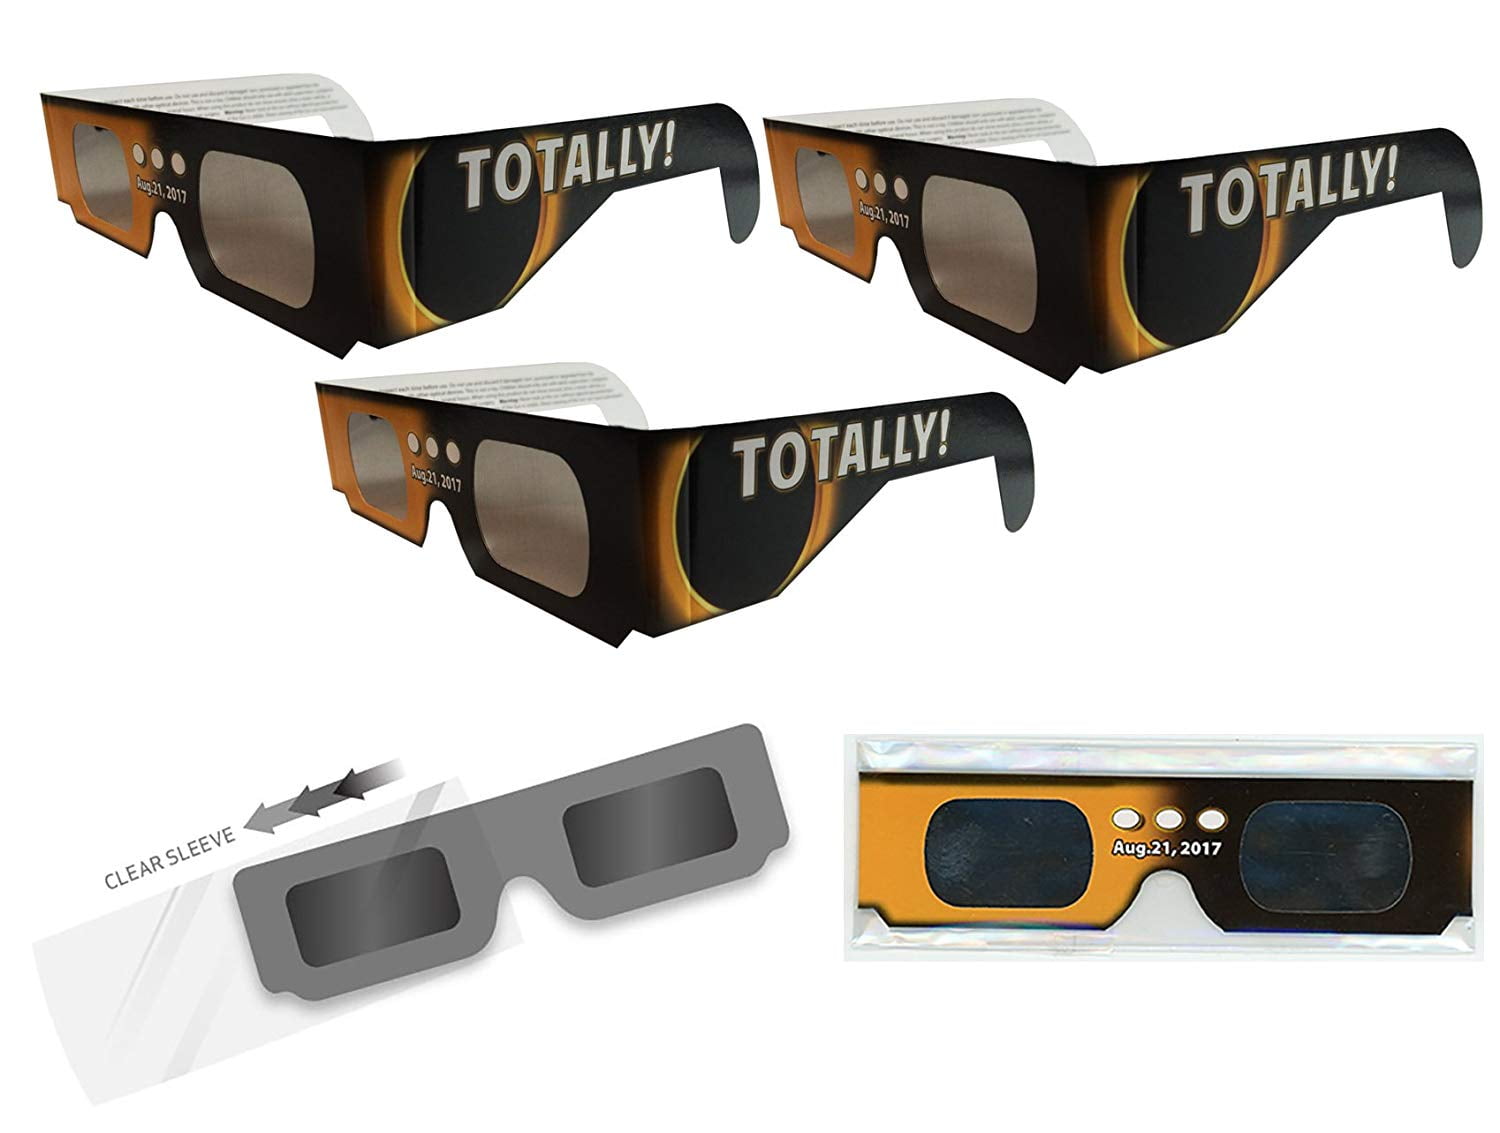 Eclipse Glasses Solar Sun Viewing ISO certified safe CE Designed Shipped Texas 